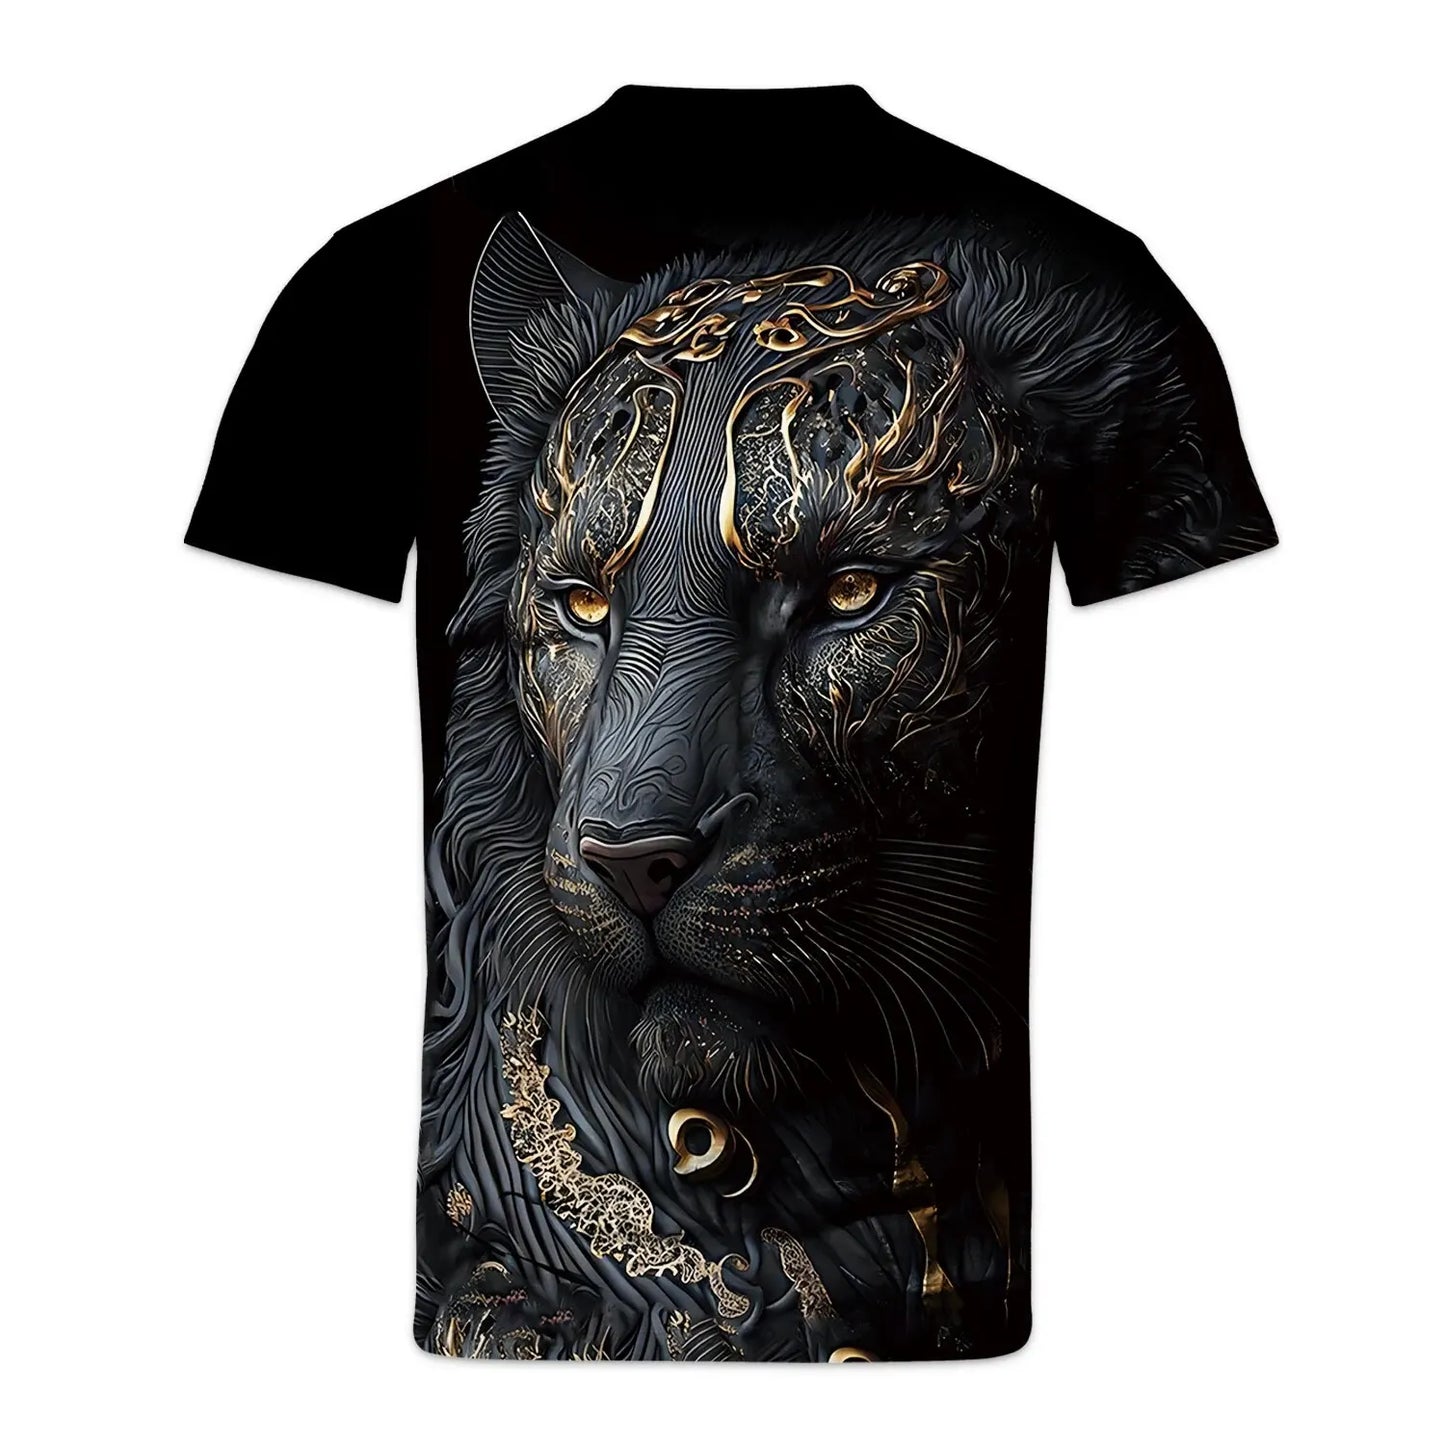 Daily Oversized Men's T-Shirt 3D Lion Print Tees Tops Summer Casual Animal Pattern Streetwear New Fashion Street Men Clothing - Hiron Store